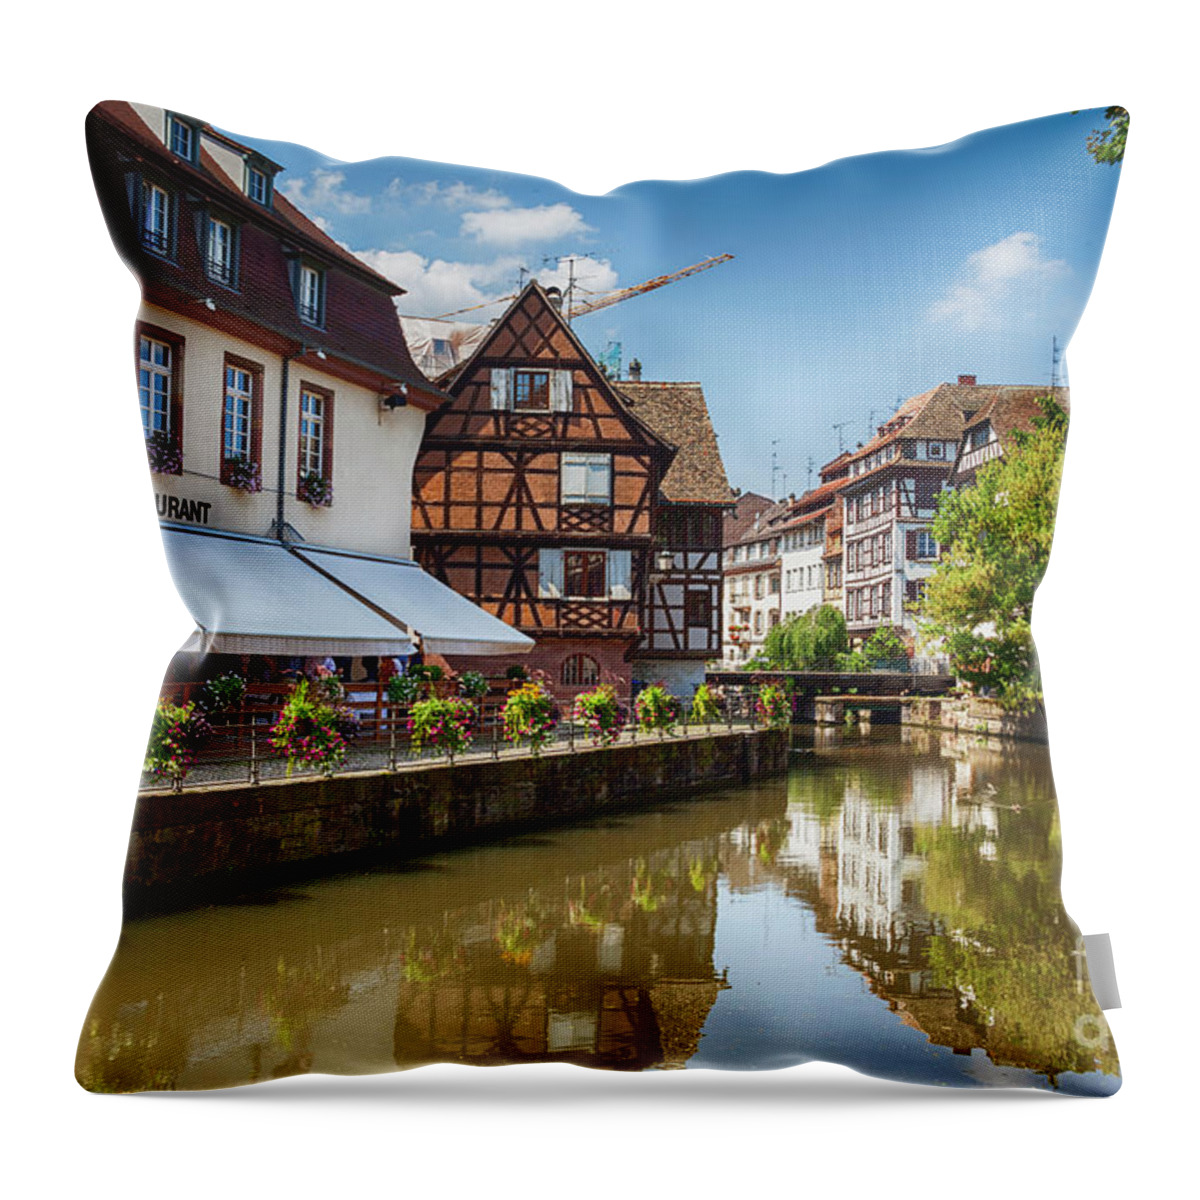 Strasbourg Throw Pillow featuring the photograph water canal in Strasbourg, France by Ariadna De Raadt